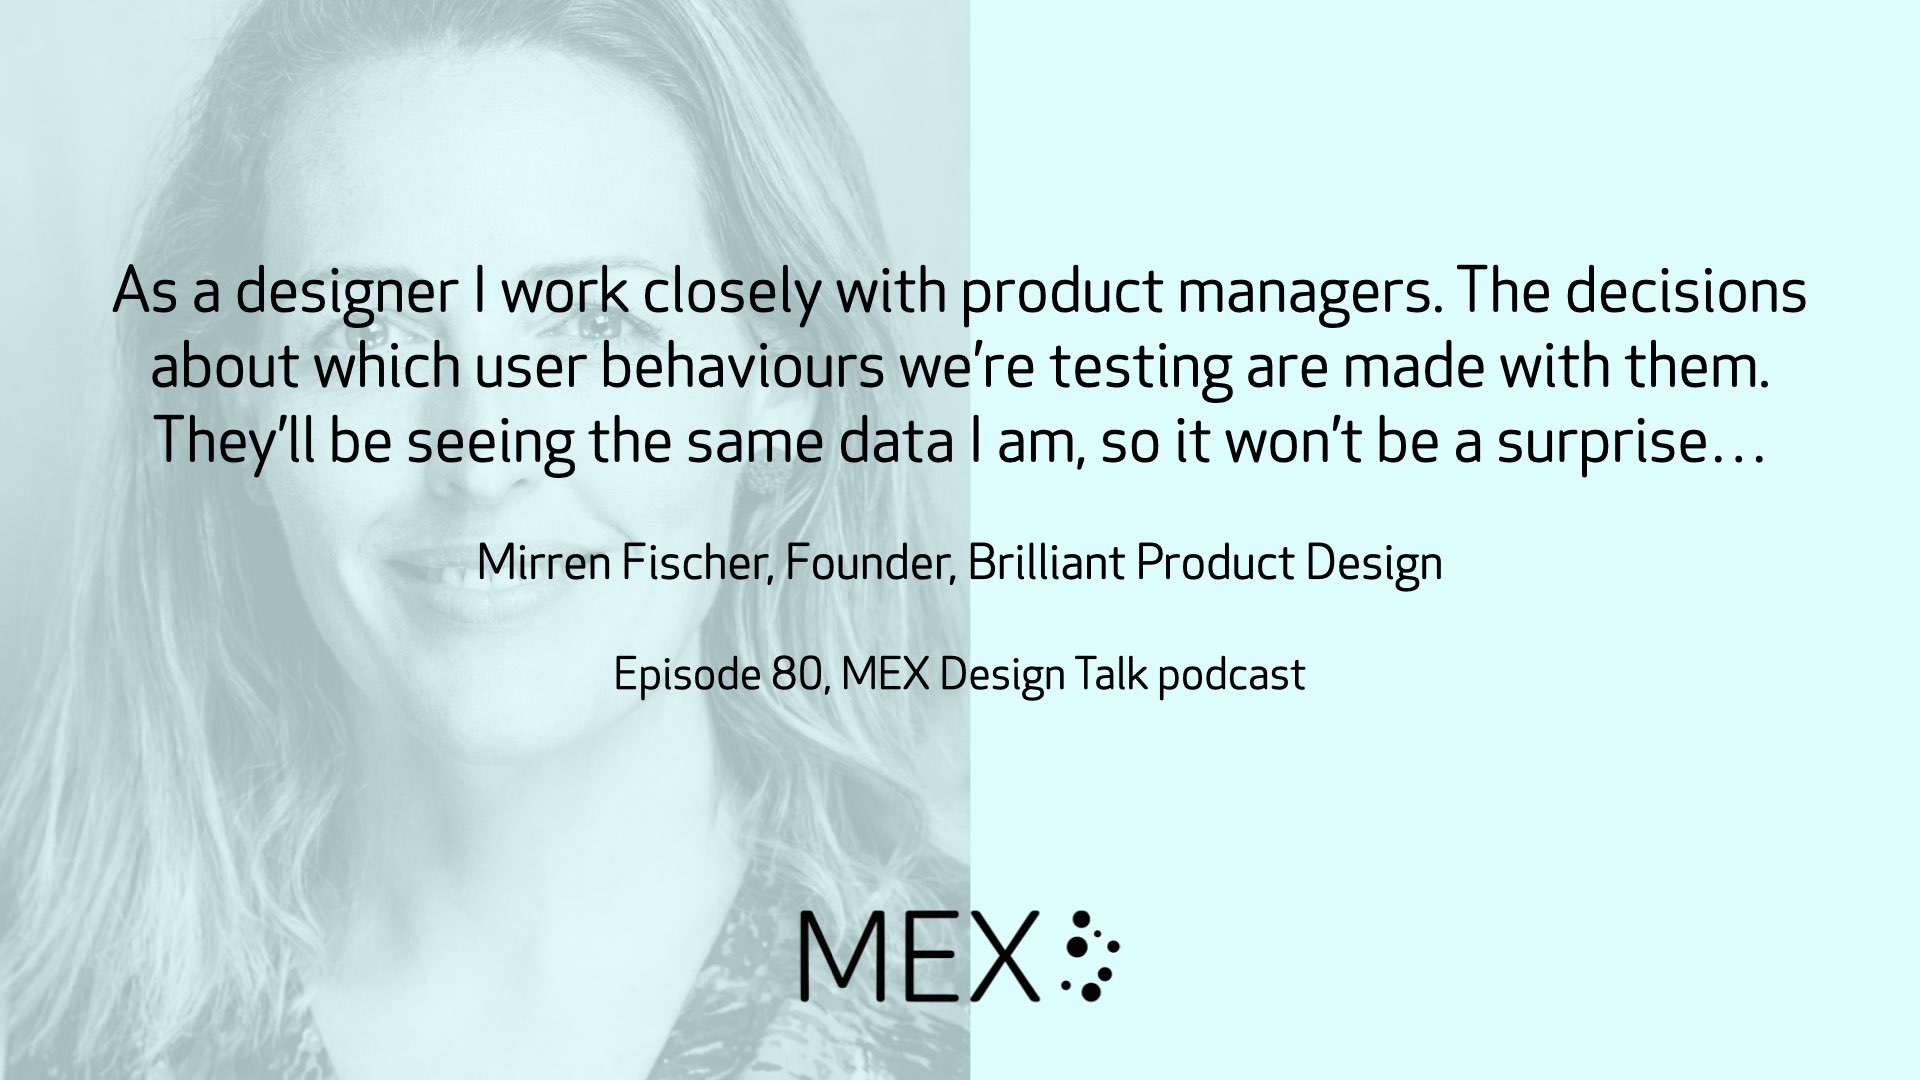 As a designer I work closely with product managers. The decisions about which user behaviours we’re testing are made with them. They’ll be seeing the same data I am, so it won’t be a surprise… Mirren Fischer, Founder, Brilliant Product Design Episode 80, MEX Design Talk podcast